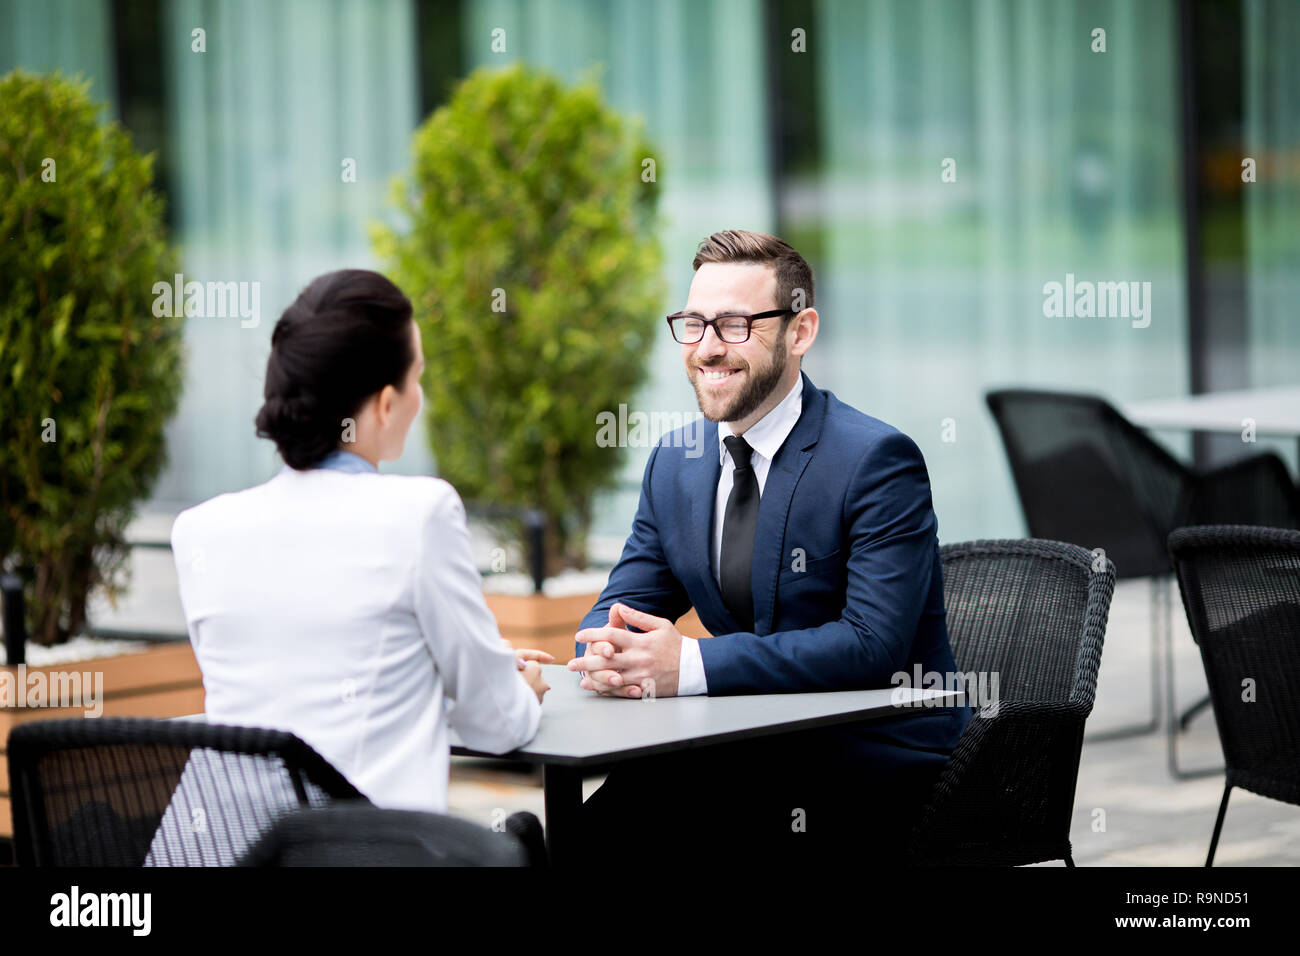 Smiling man and woman sitting at cafe and having dialogue Stock Photo